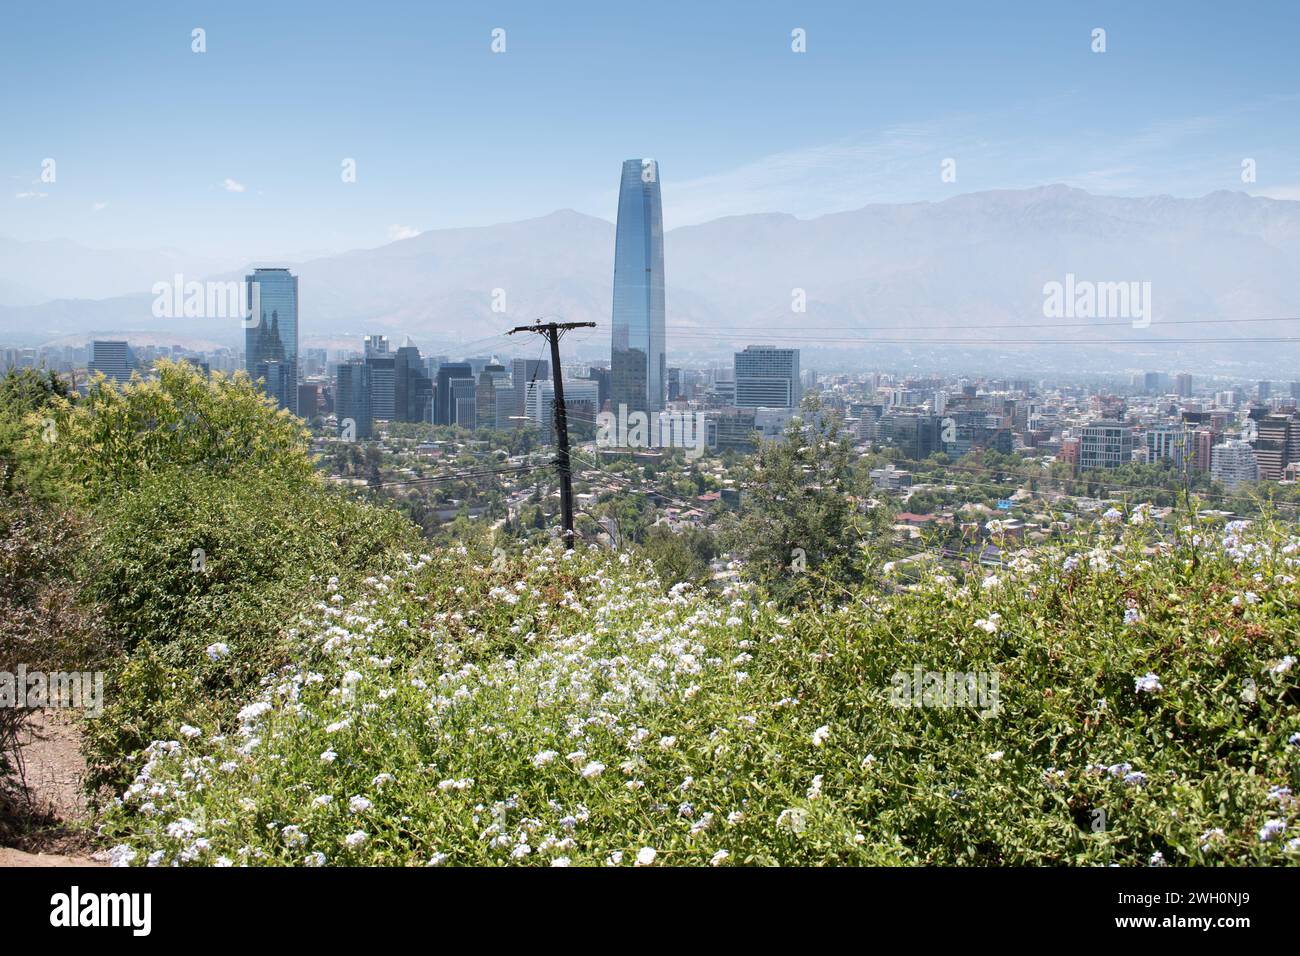 The stunning view from San Cristobal Hill in Santiago offers panoramic vistas of the cityscape framed by the majestic Andes Mountains in the distance. Stock Photo